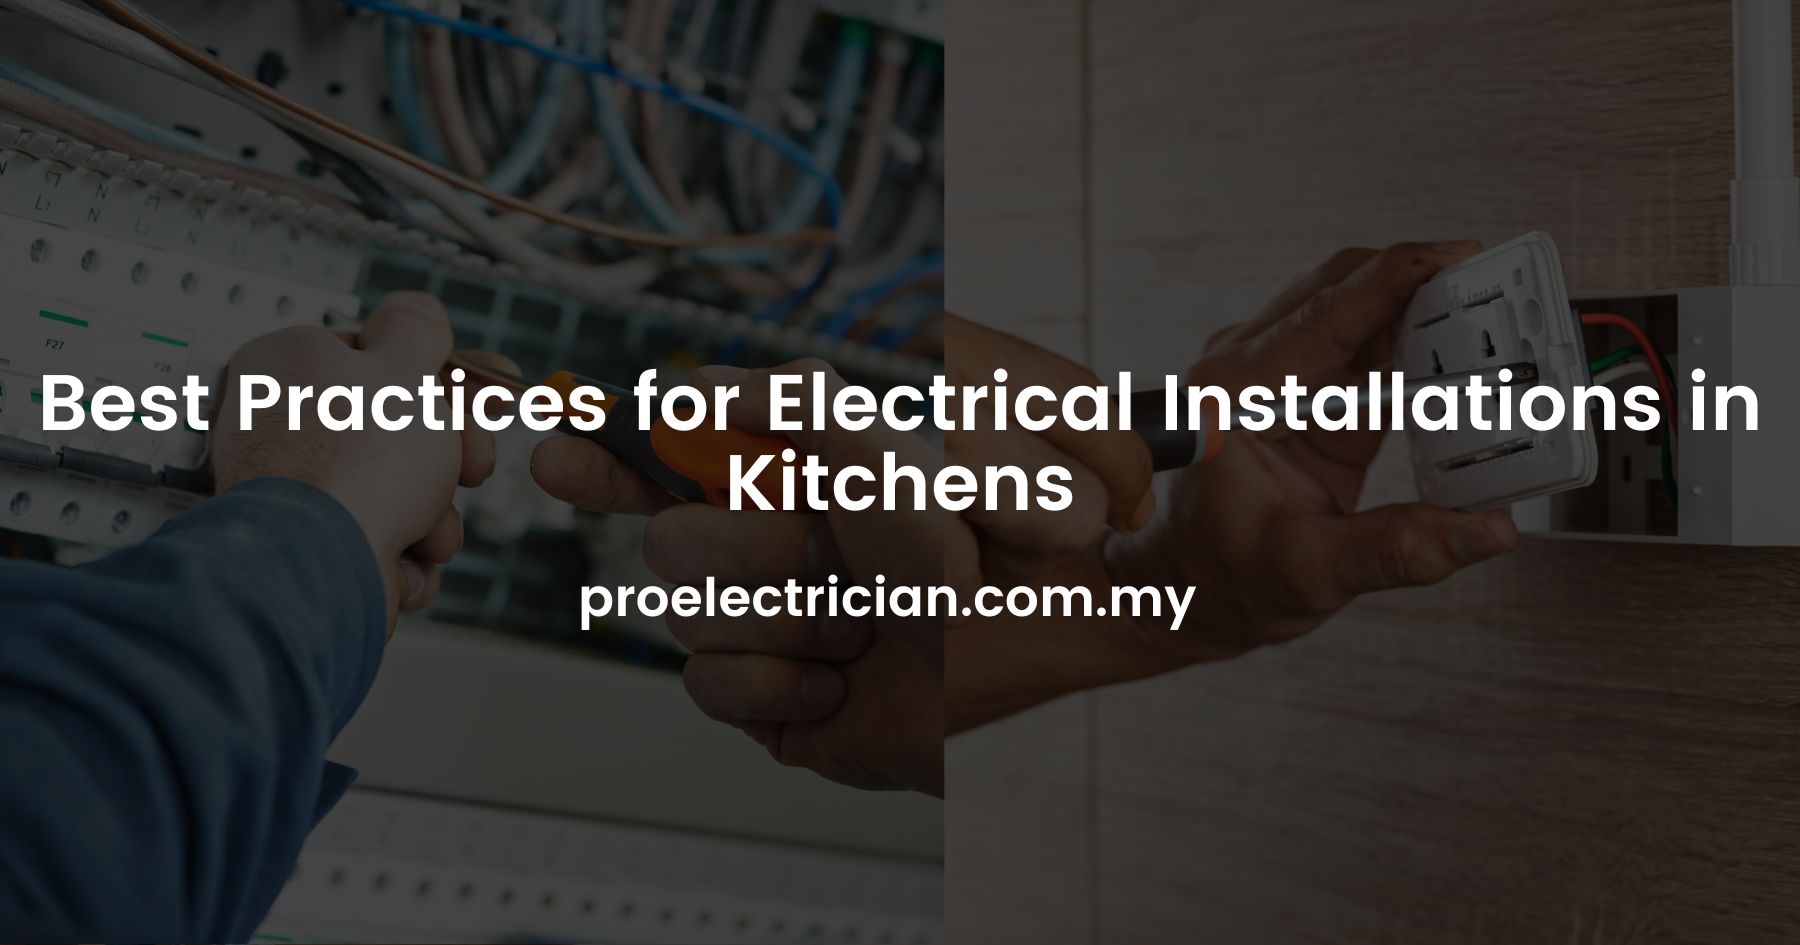 Best Practices for Electrical Installations in Kitchens